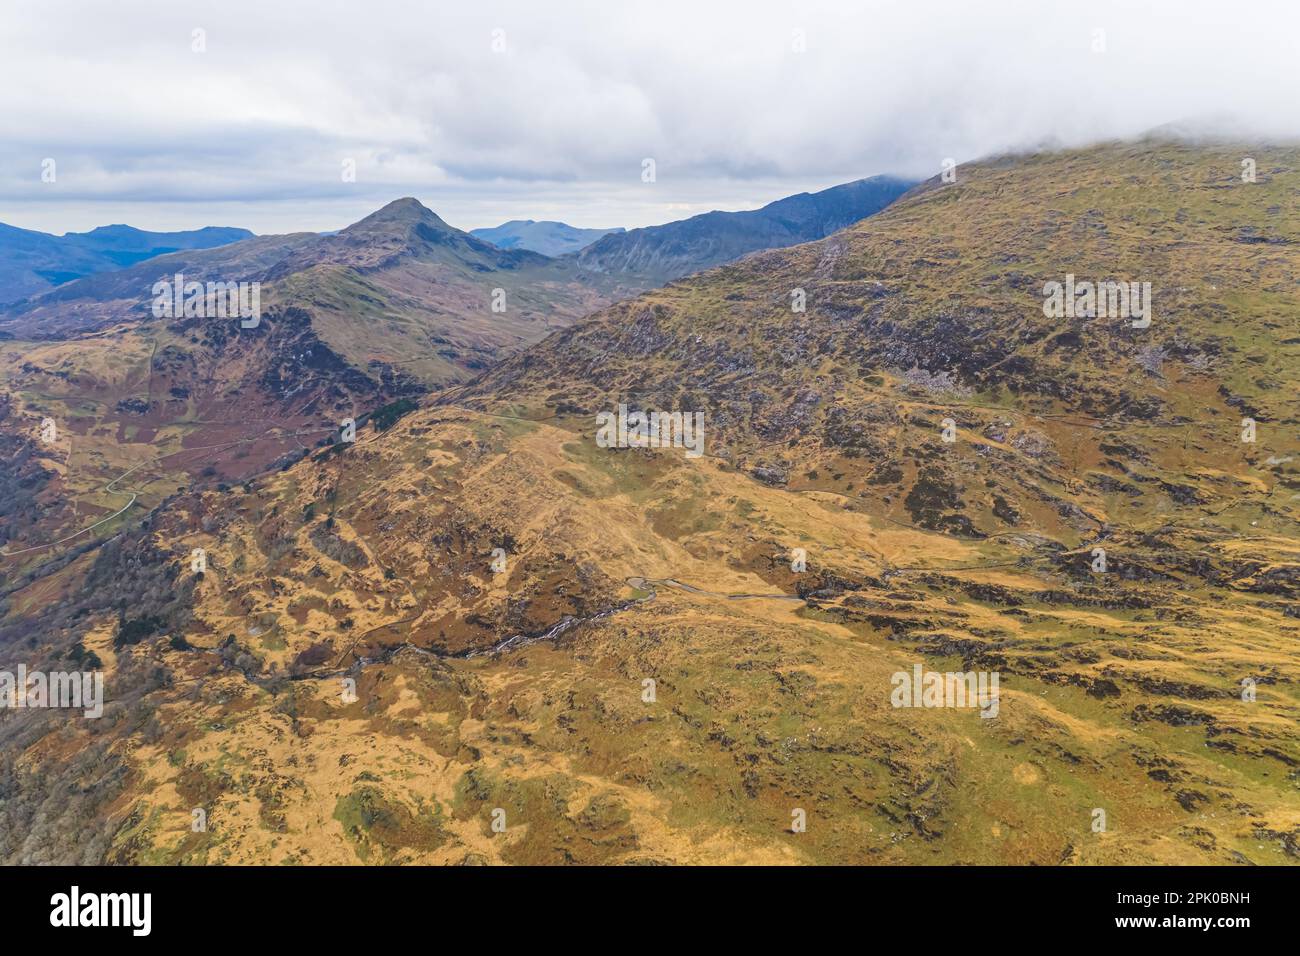 Stunning part of Snowdonia National Park, Wales seen from aerial view perspective. Cloudy sky over mountain range. High quality photo Stock Photo